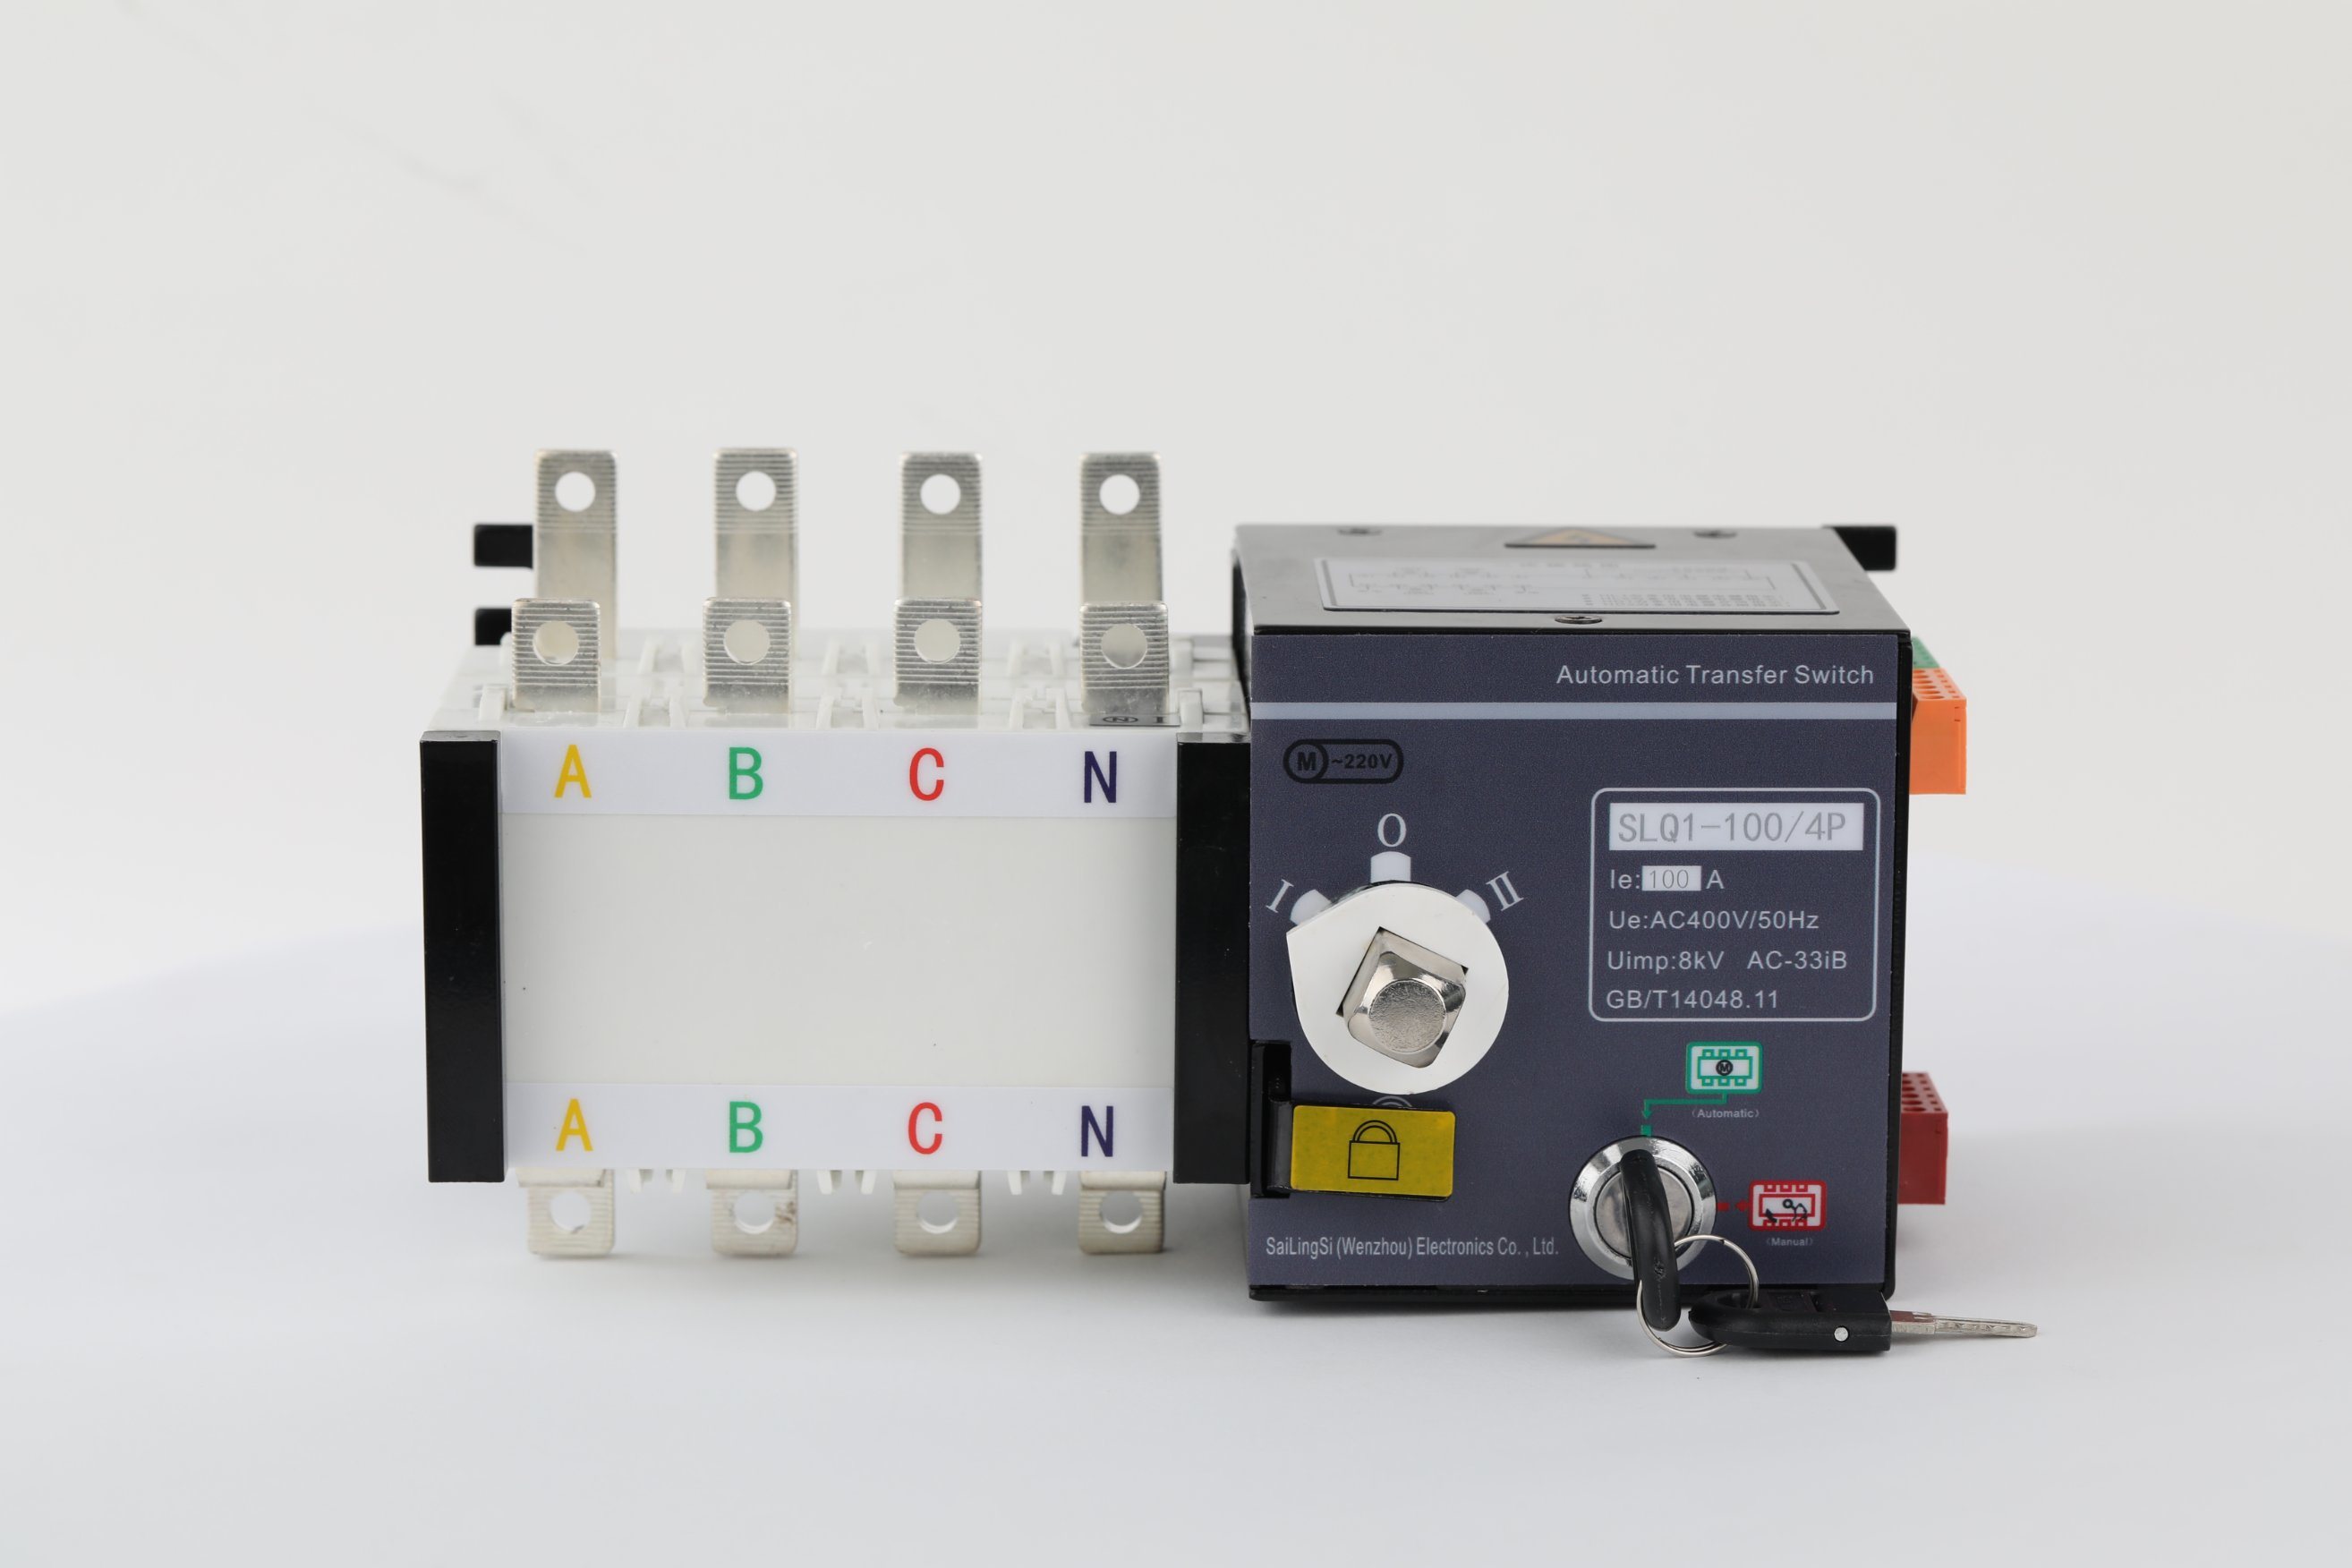 Uvq1-250A 4p ATS 400V 50Hz ATS Self Return Electric Automatic Transfer Switch with Fire Control